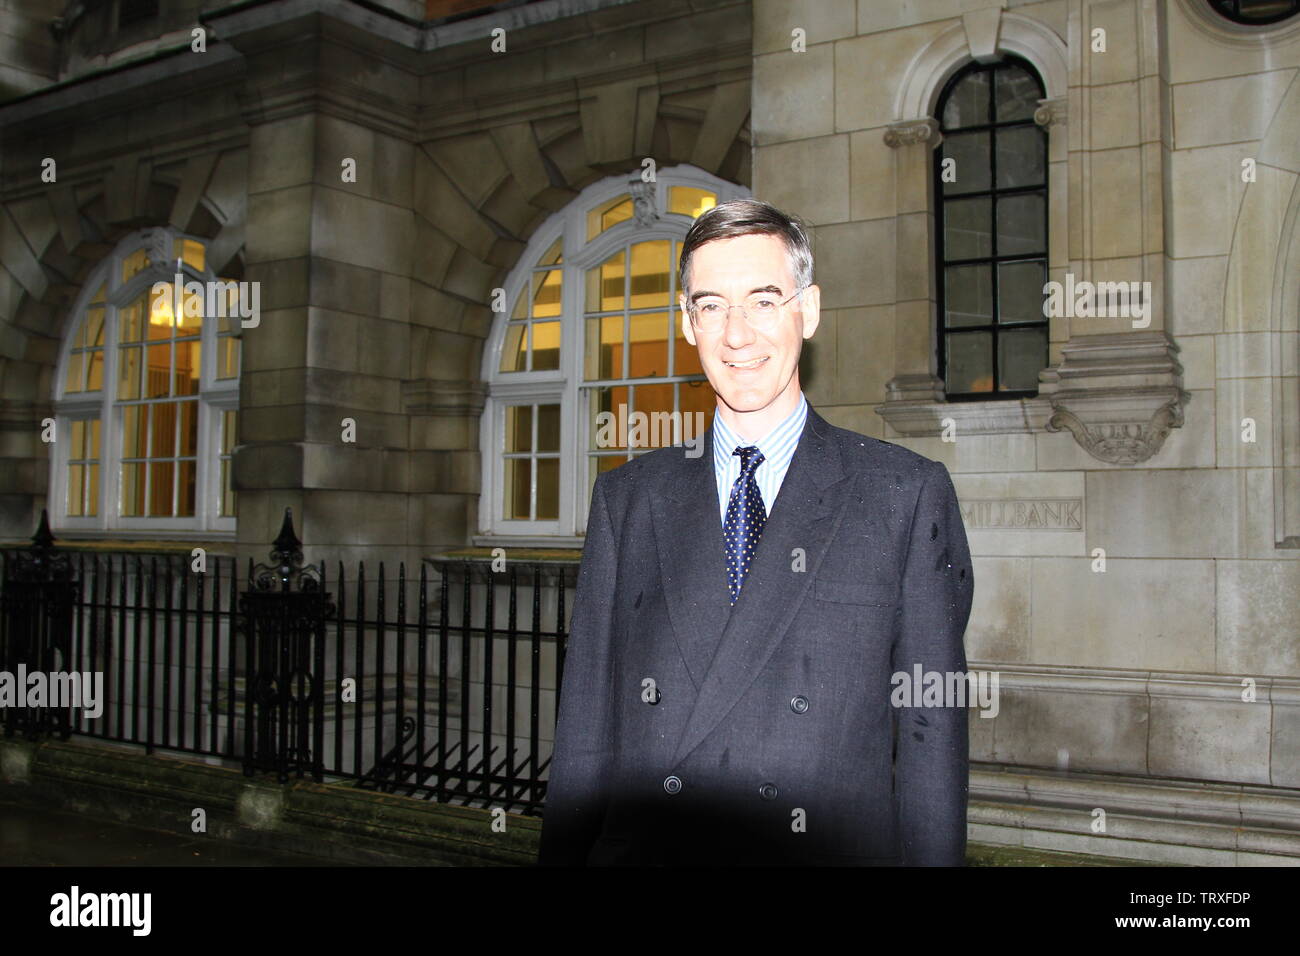 JACOB REES-MOGG MP IN WESTMINSTER ON THE 12TH JUNE 2019. CONSERVATIVE PARTY MPS. BRITISH POLITICIANS. UK POLITICS. TORY. TORIES. ERG . EUROPEAN RESEARCH GROUP. LBC RADIO PRESENTER. Stock Photo